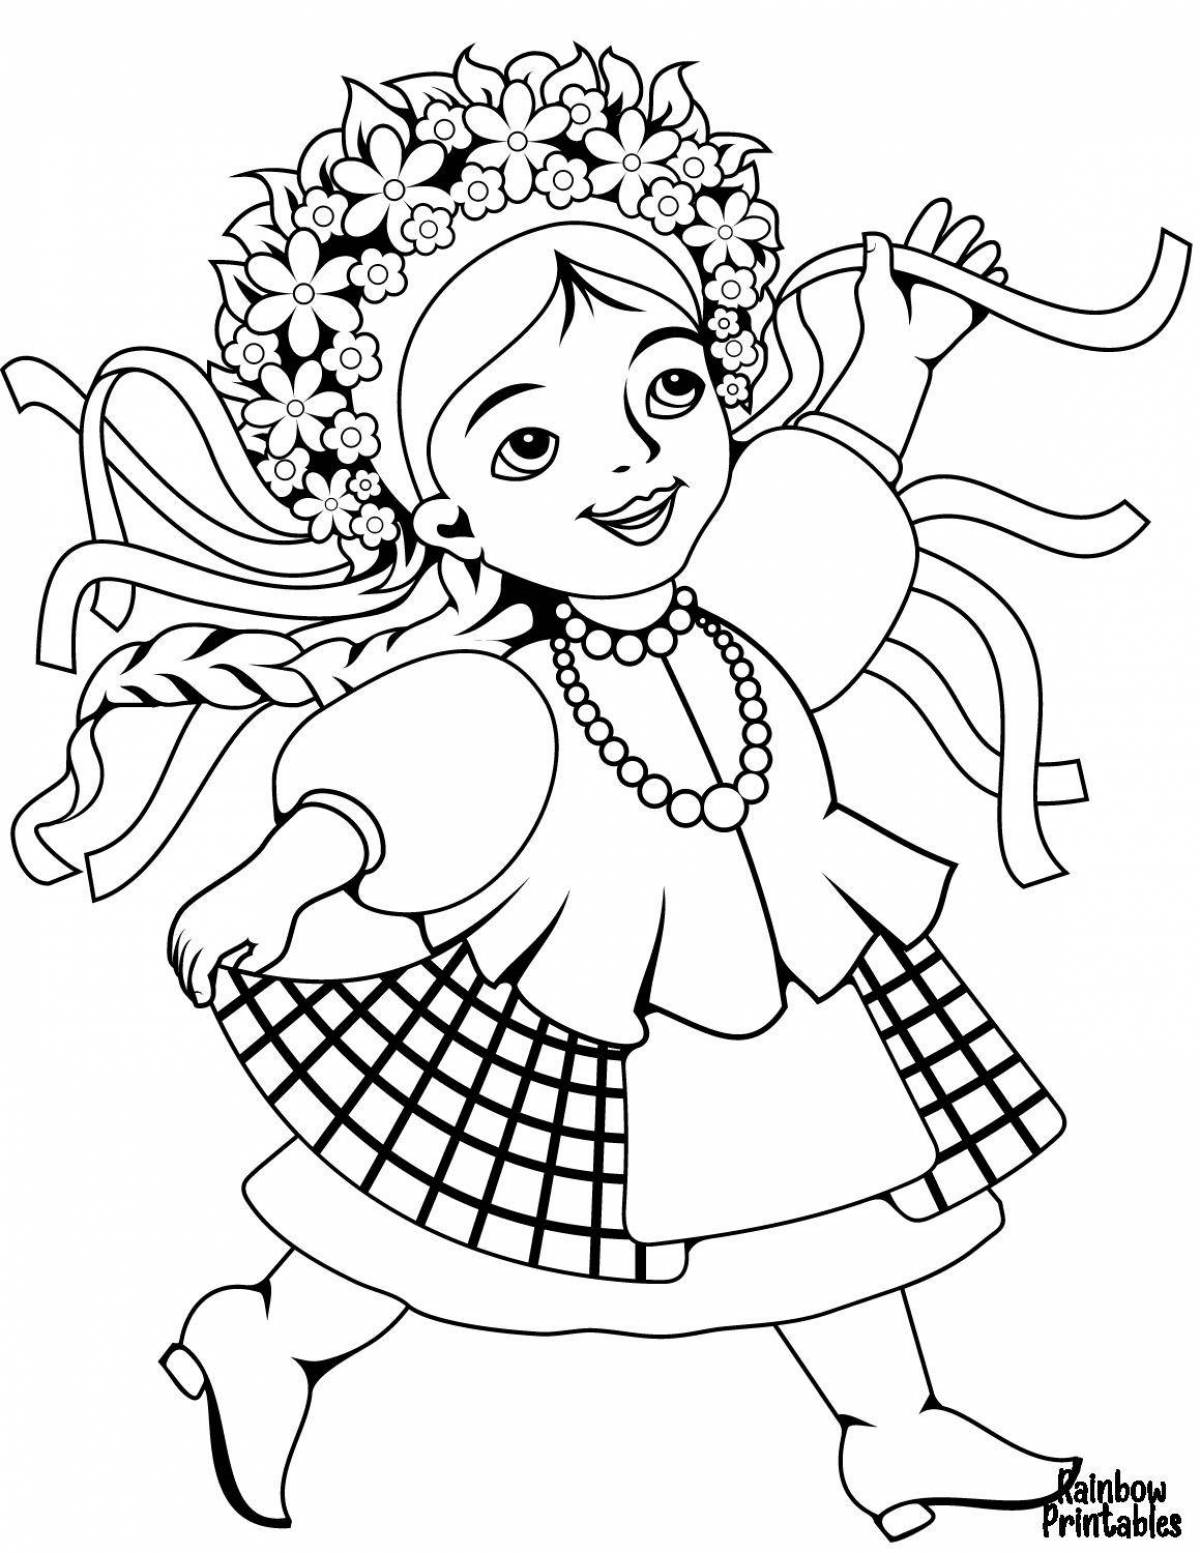 Cute belarusian clothes coloring pages for kids